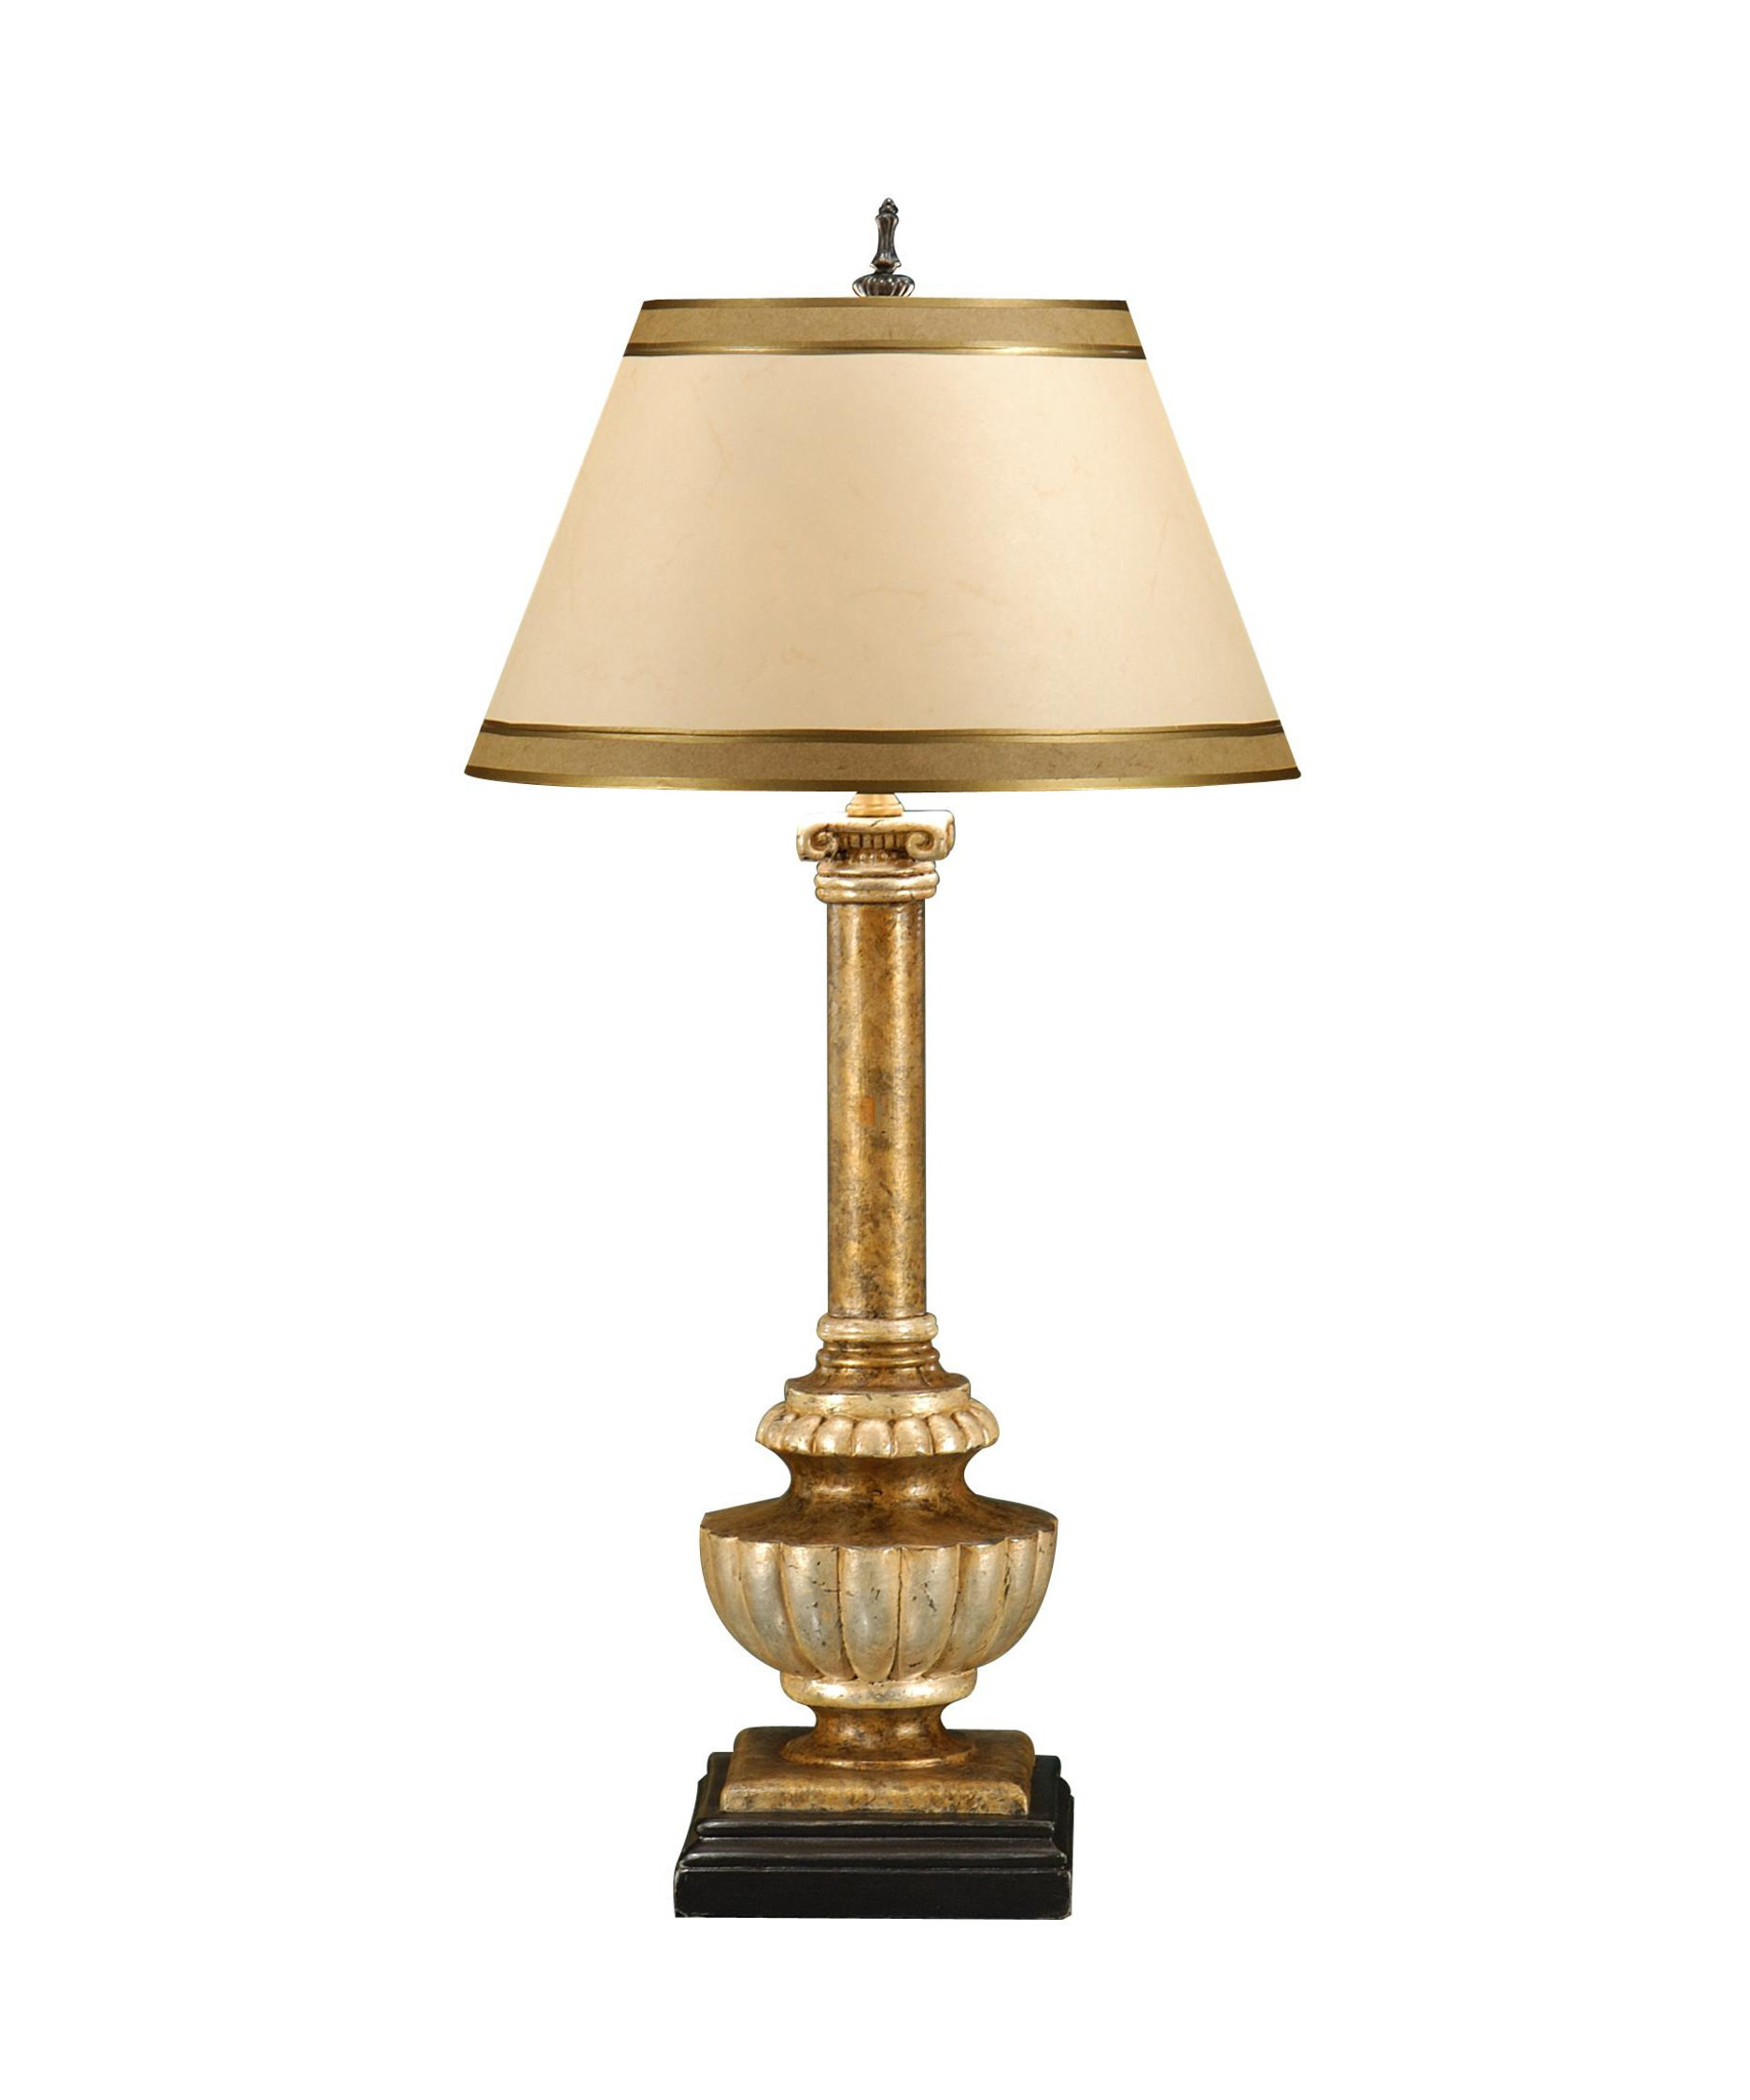 tiffany style vase of 32 unique tiffany desk lamps creative lighting ideas for home intended for dale tiffany table lamp home design plus trendy dale tiffany floor lamps beautiful table and lamp